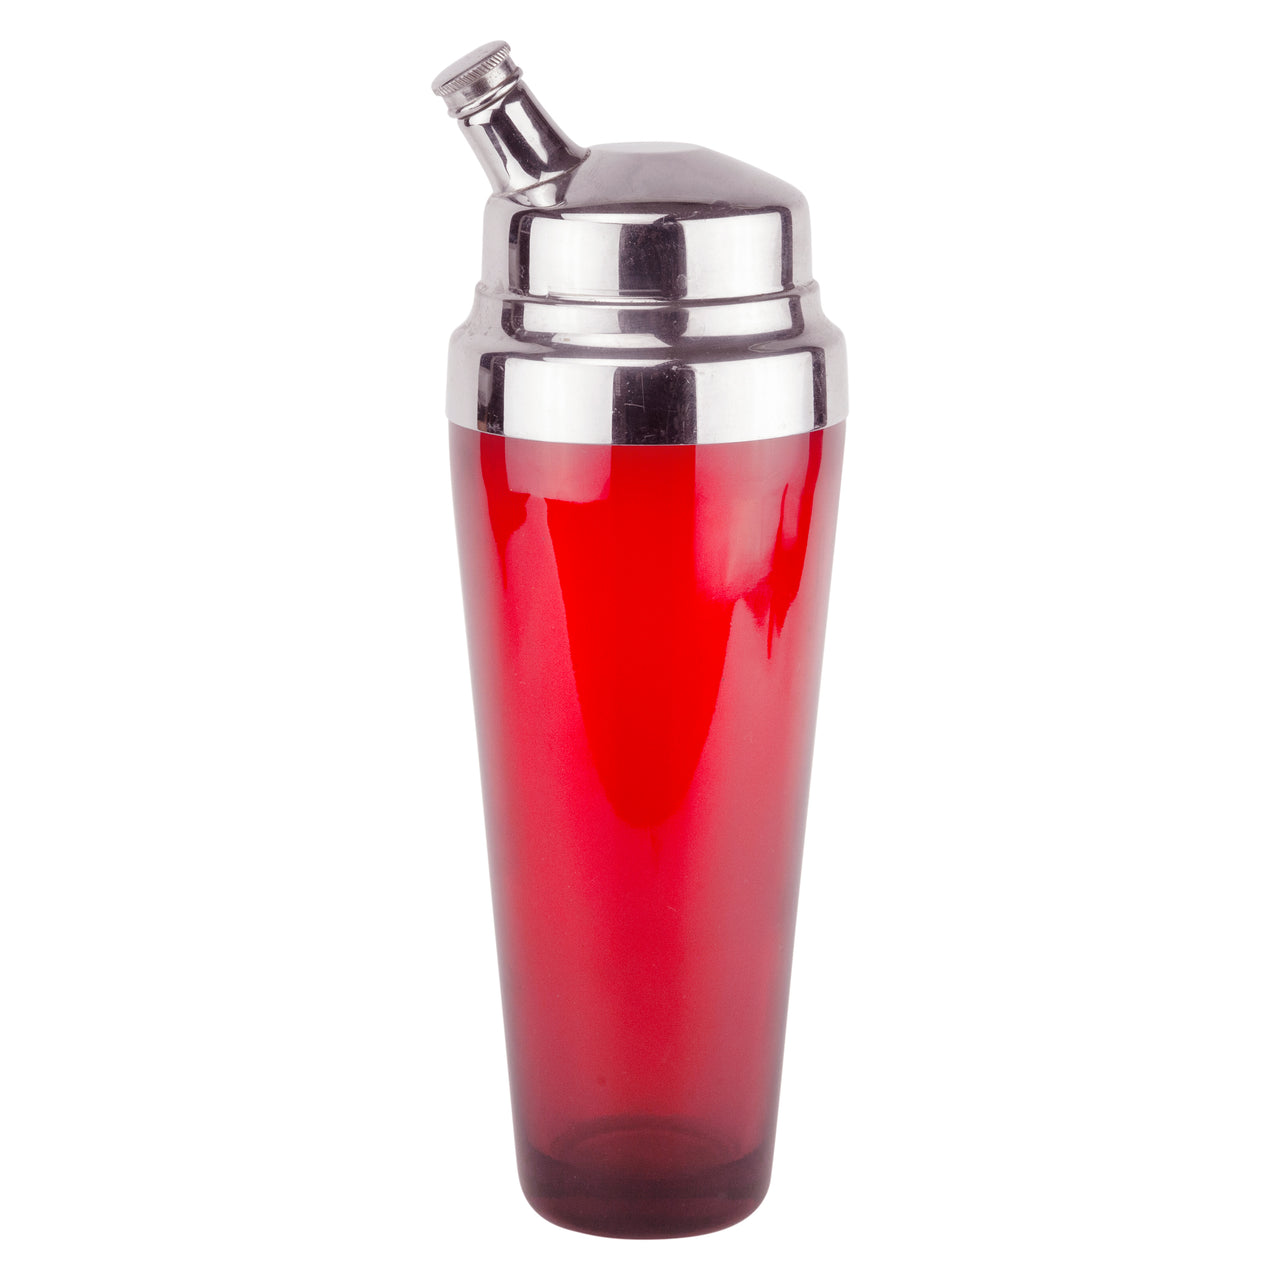 Ruby Red Tall Cocktail Shaker